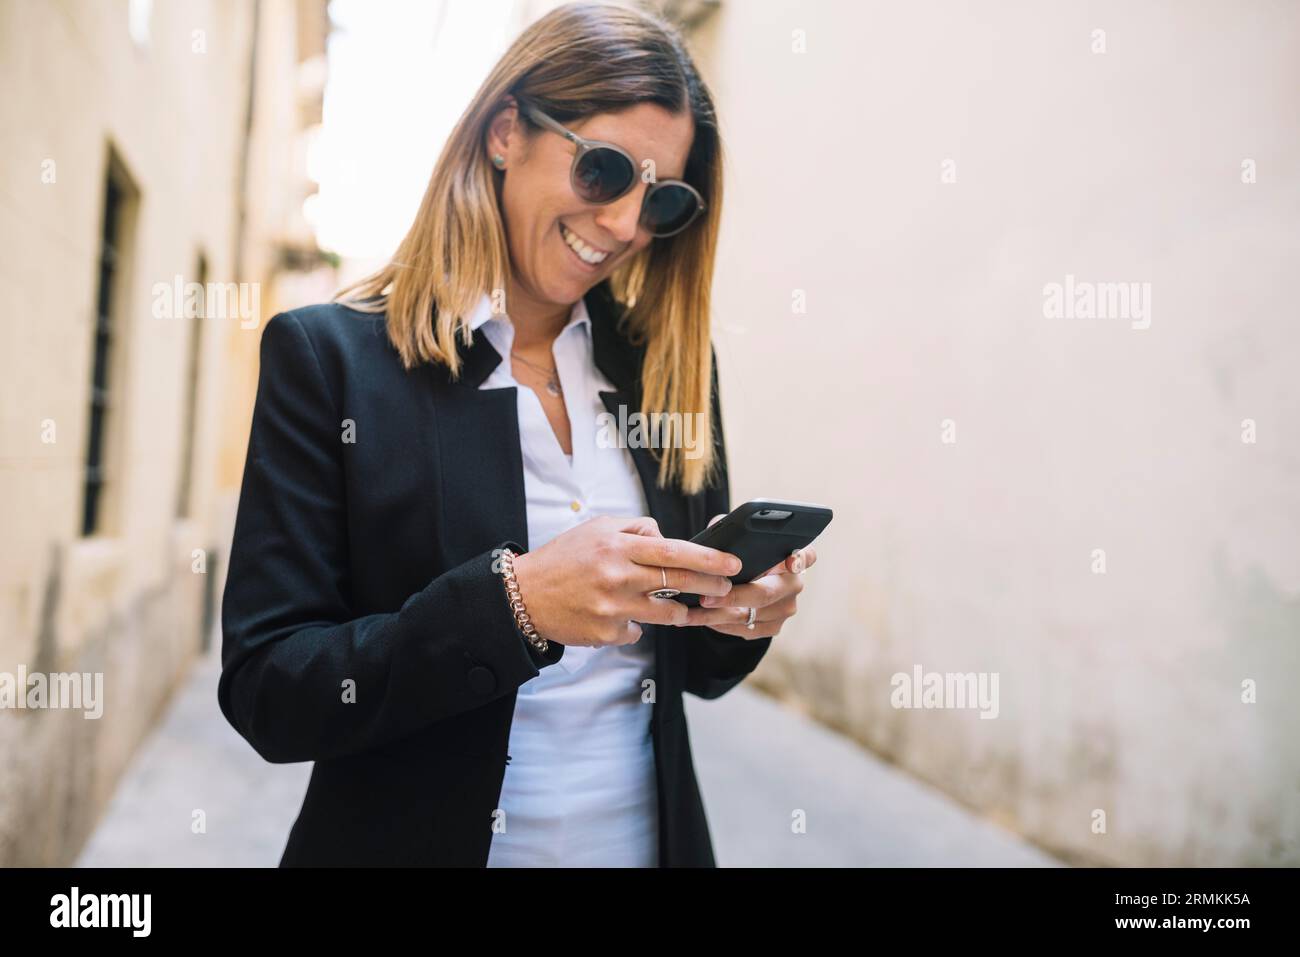 Smiling elegant young woman using smartphone buildings street Stock Photo